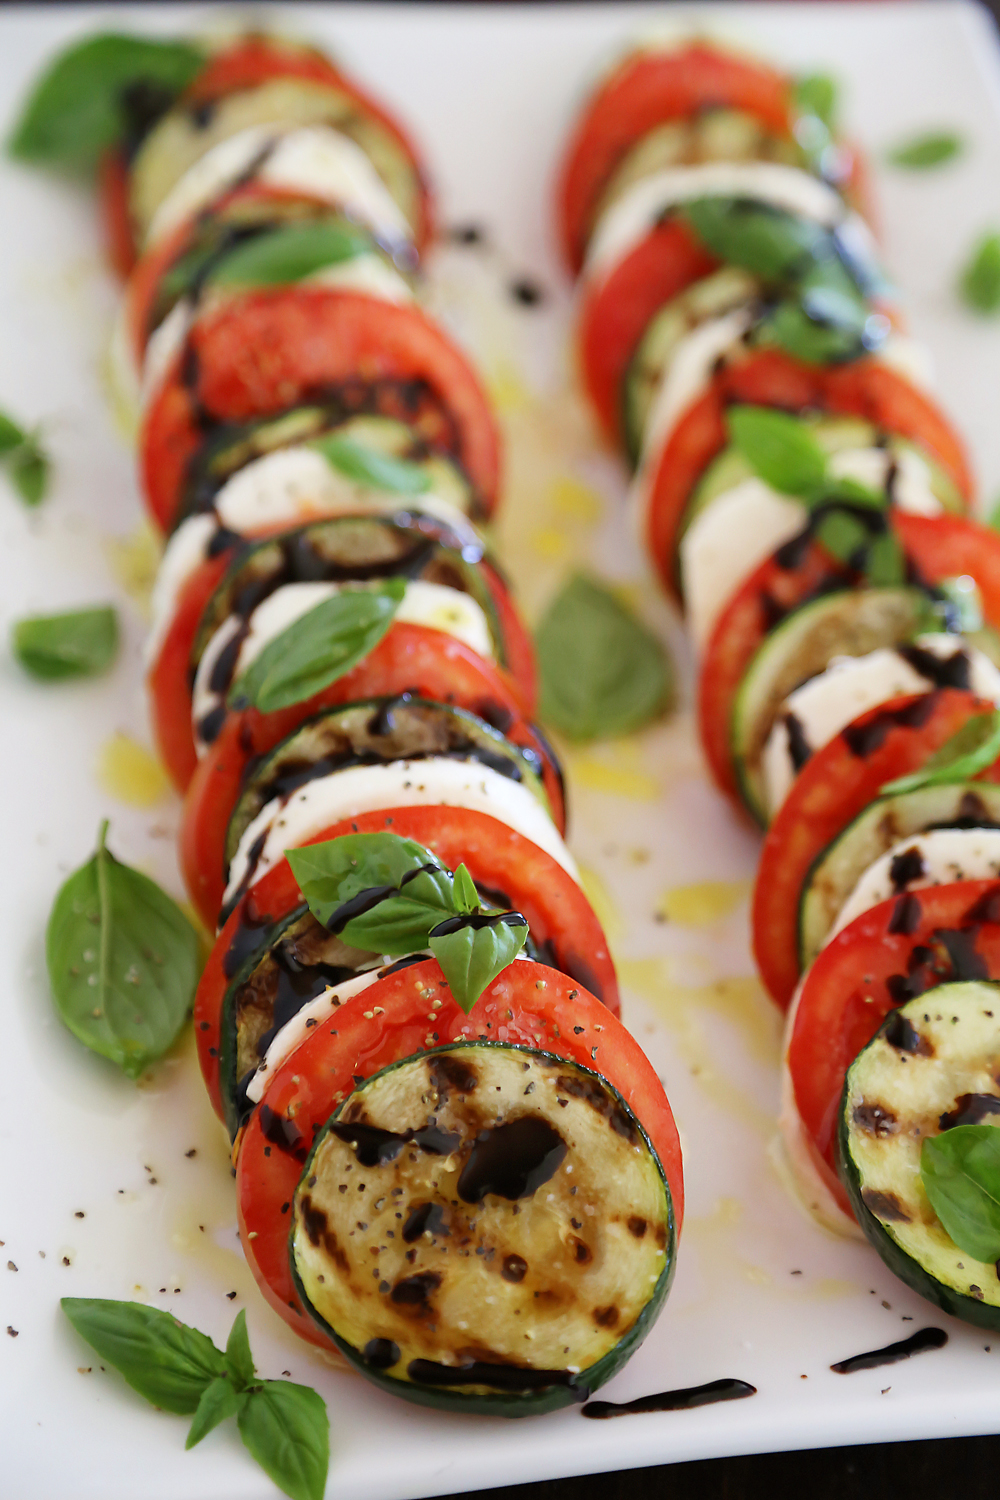 Grilled Zucchini Caprese Salad - Colorful, healthy, quick and easy. Serve alongside your favorite grilled meats and fish! Thecomfortofcooking.com